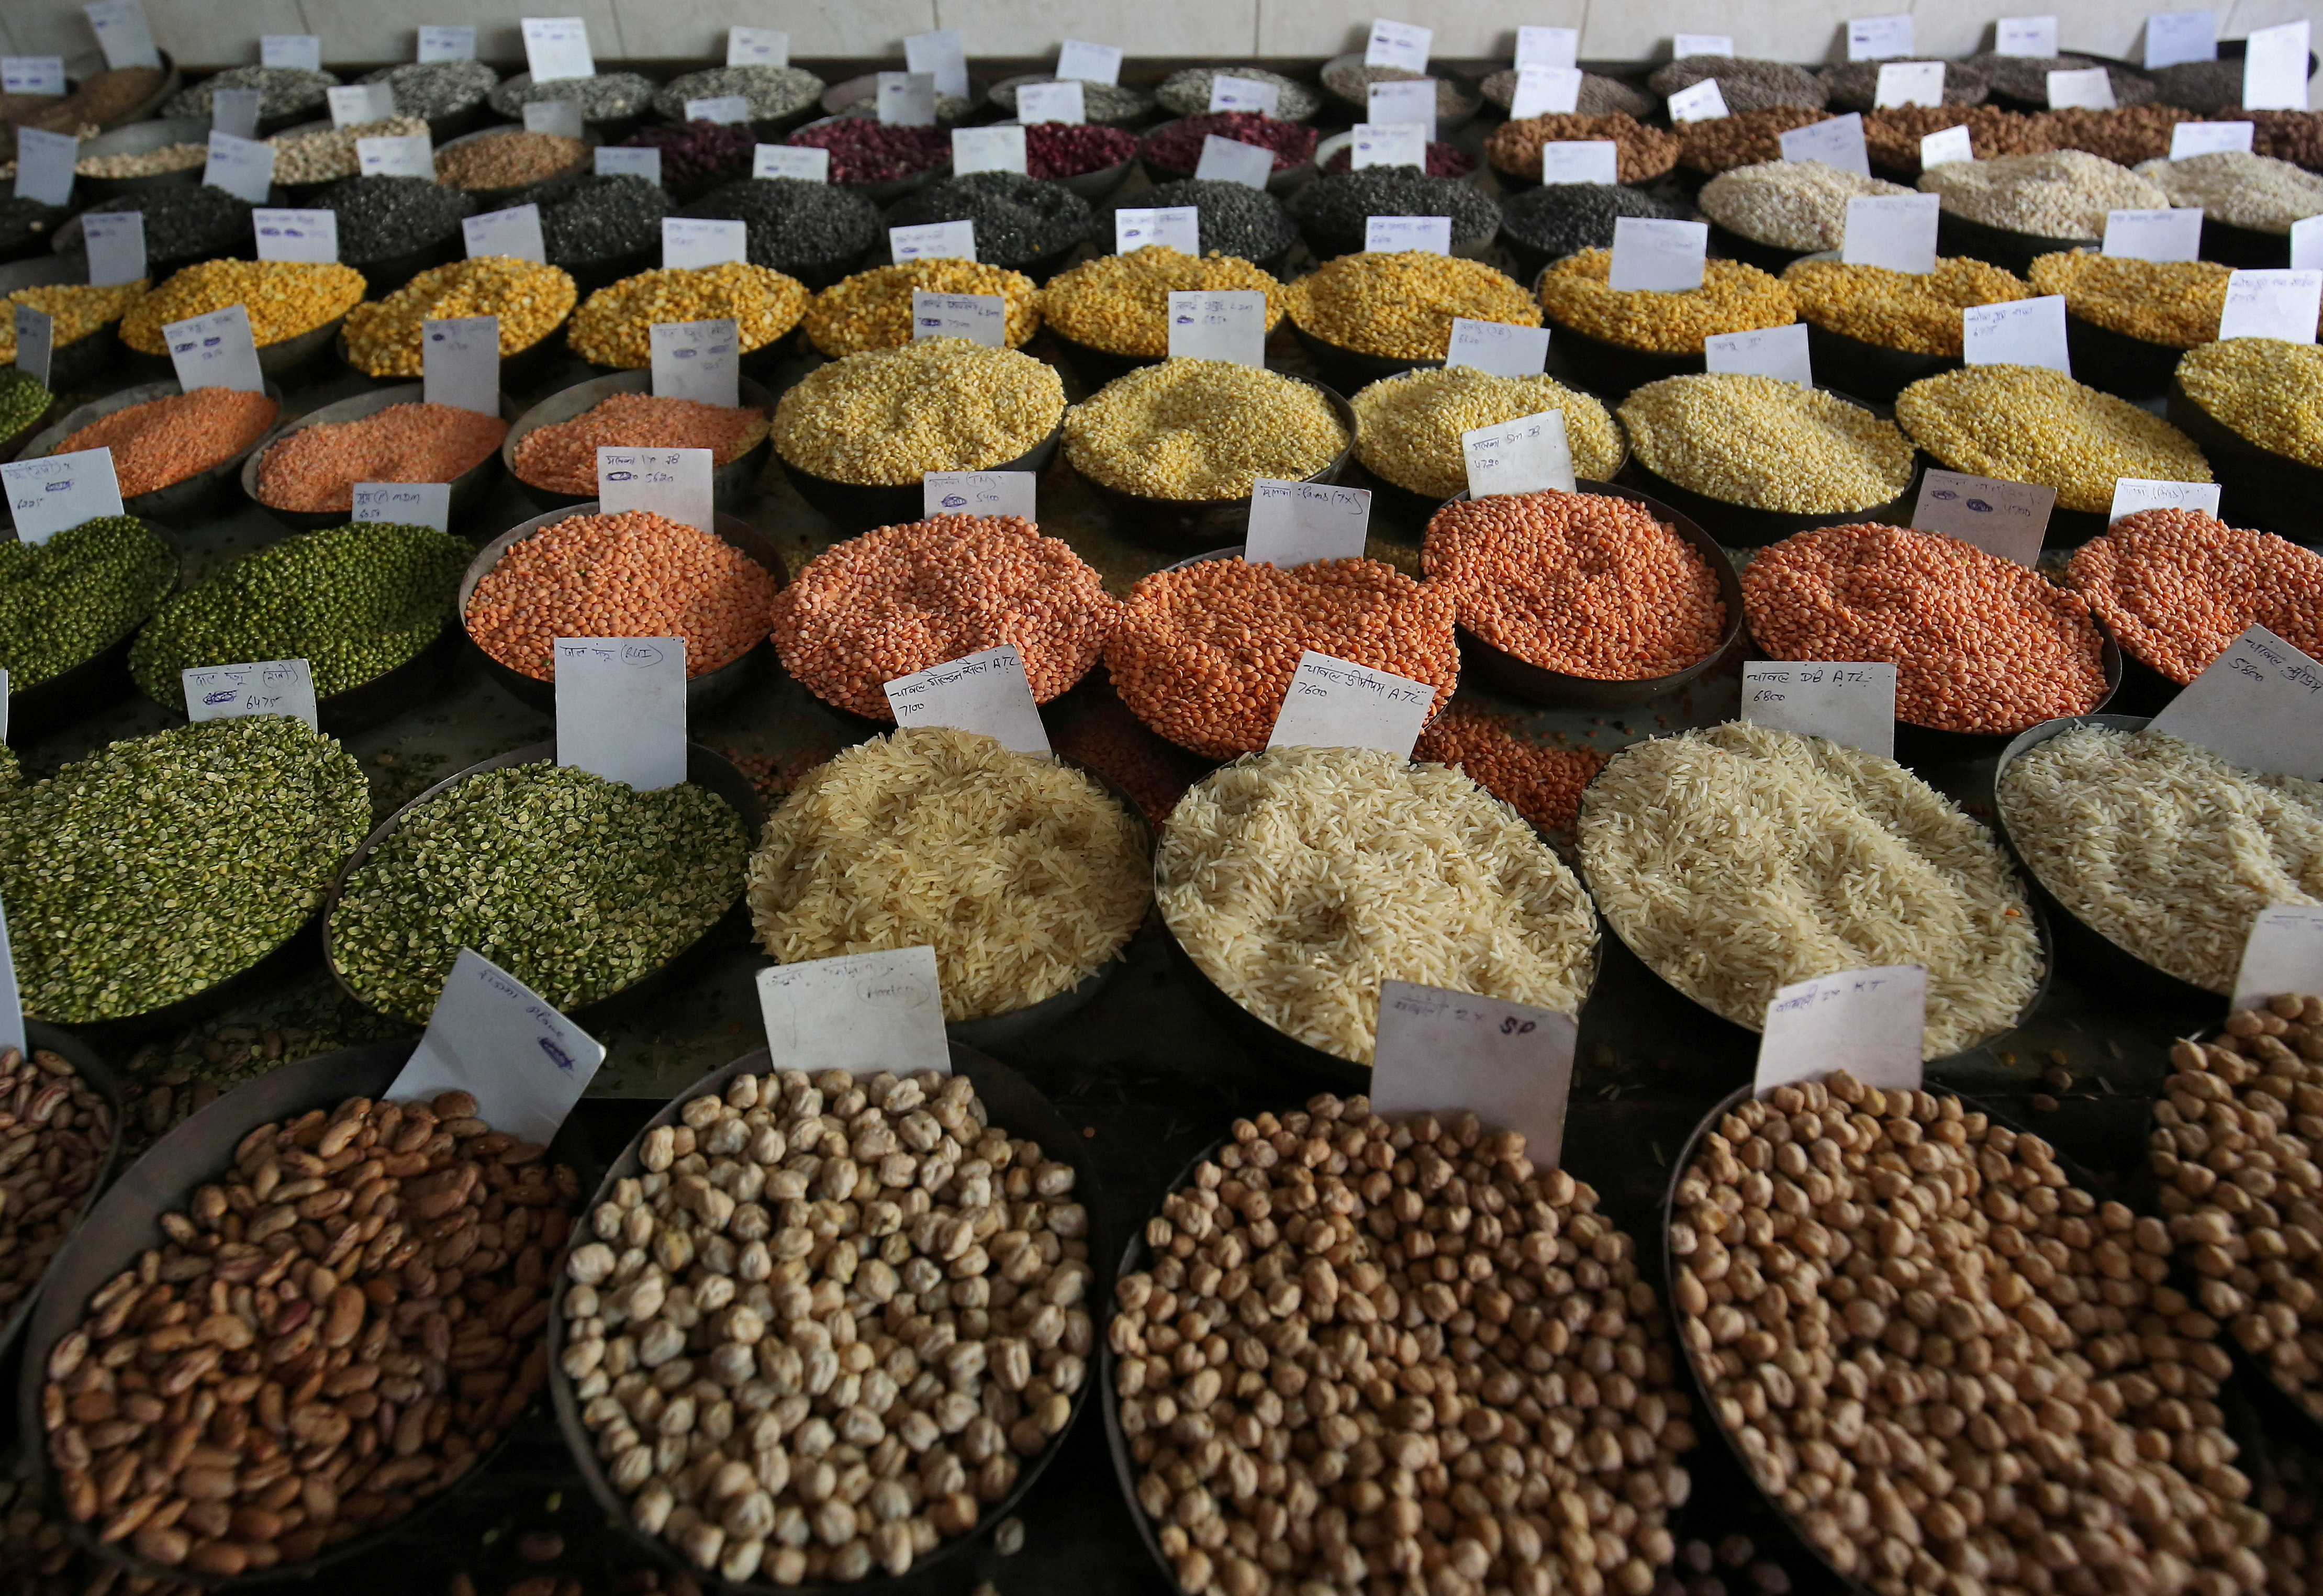 Price tags are seen on the samples of rice and lentils that are kept on display for sale at a wholesale market in the old quarters of Delhi